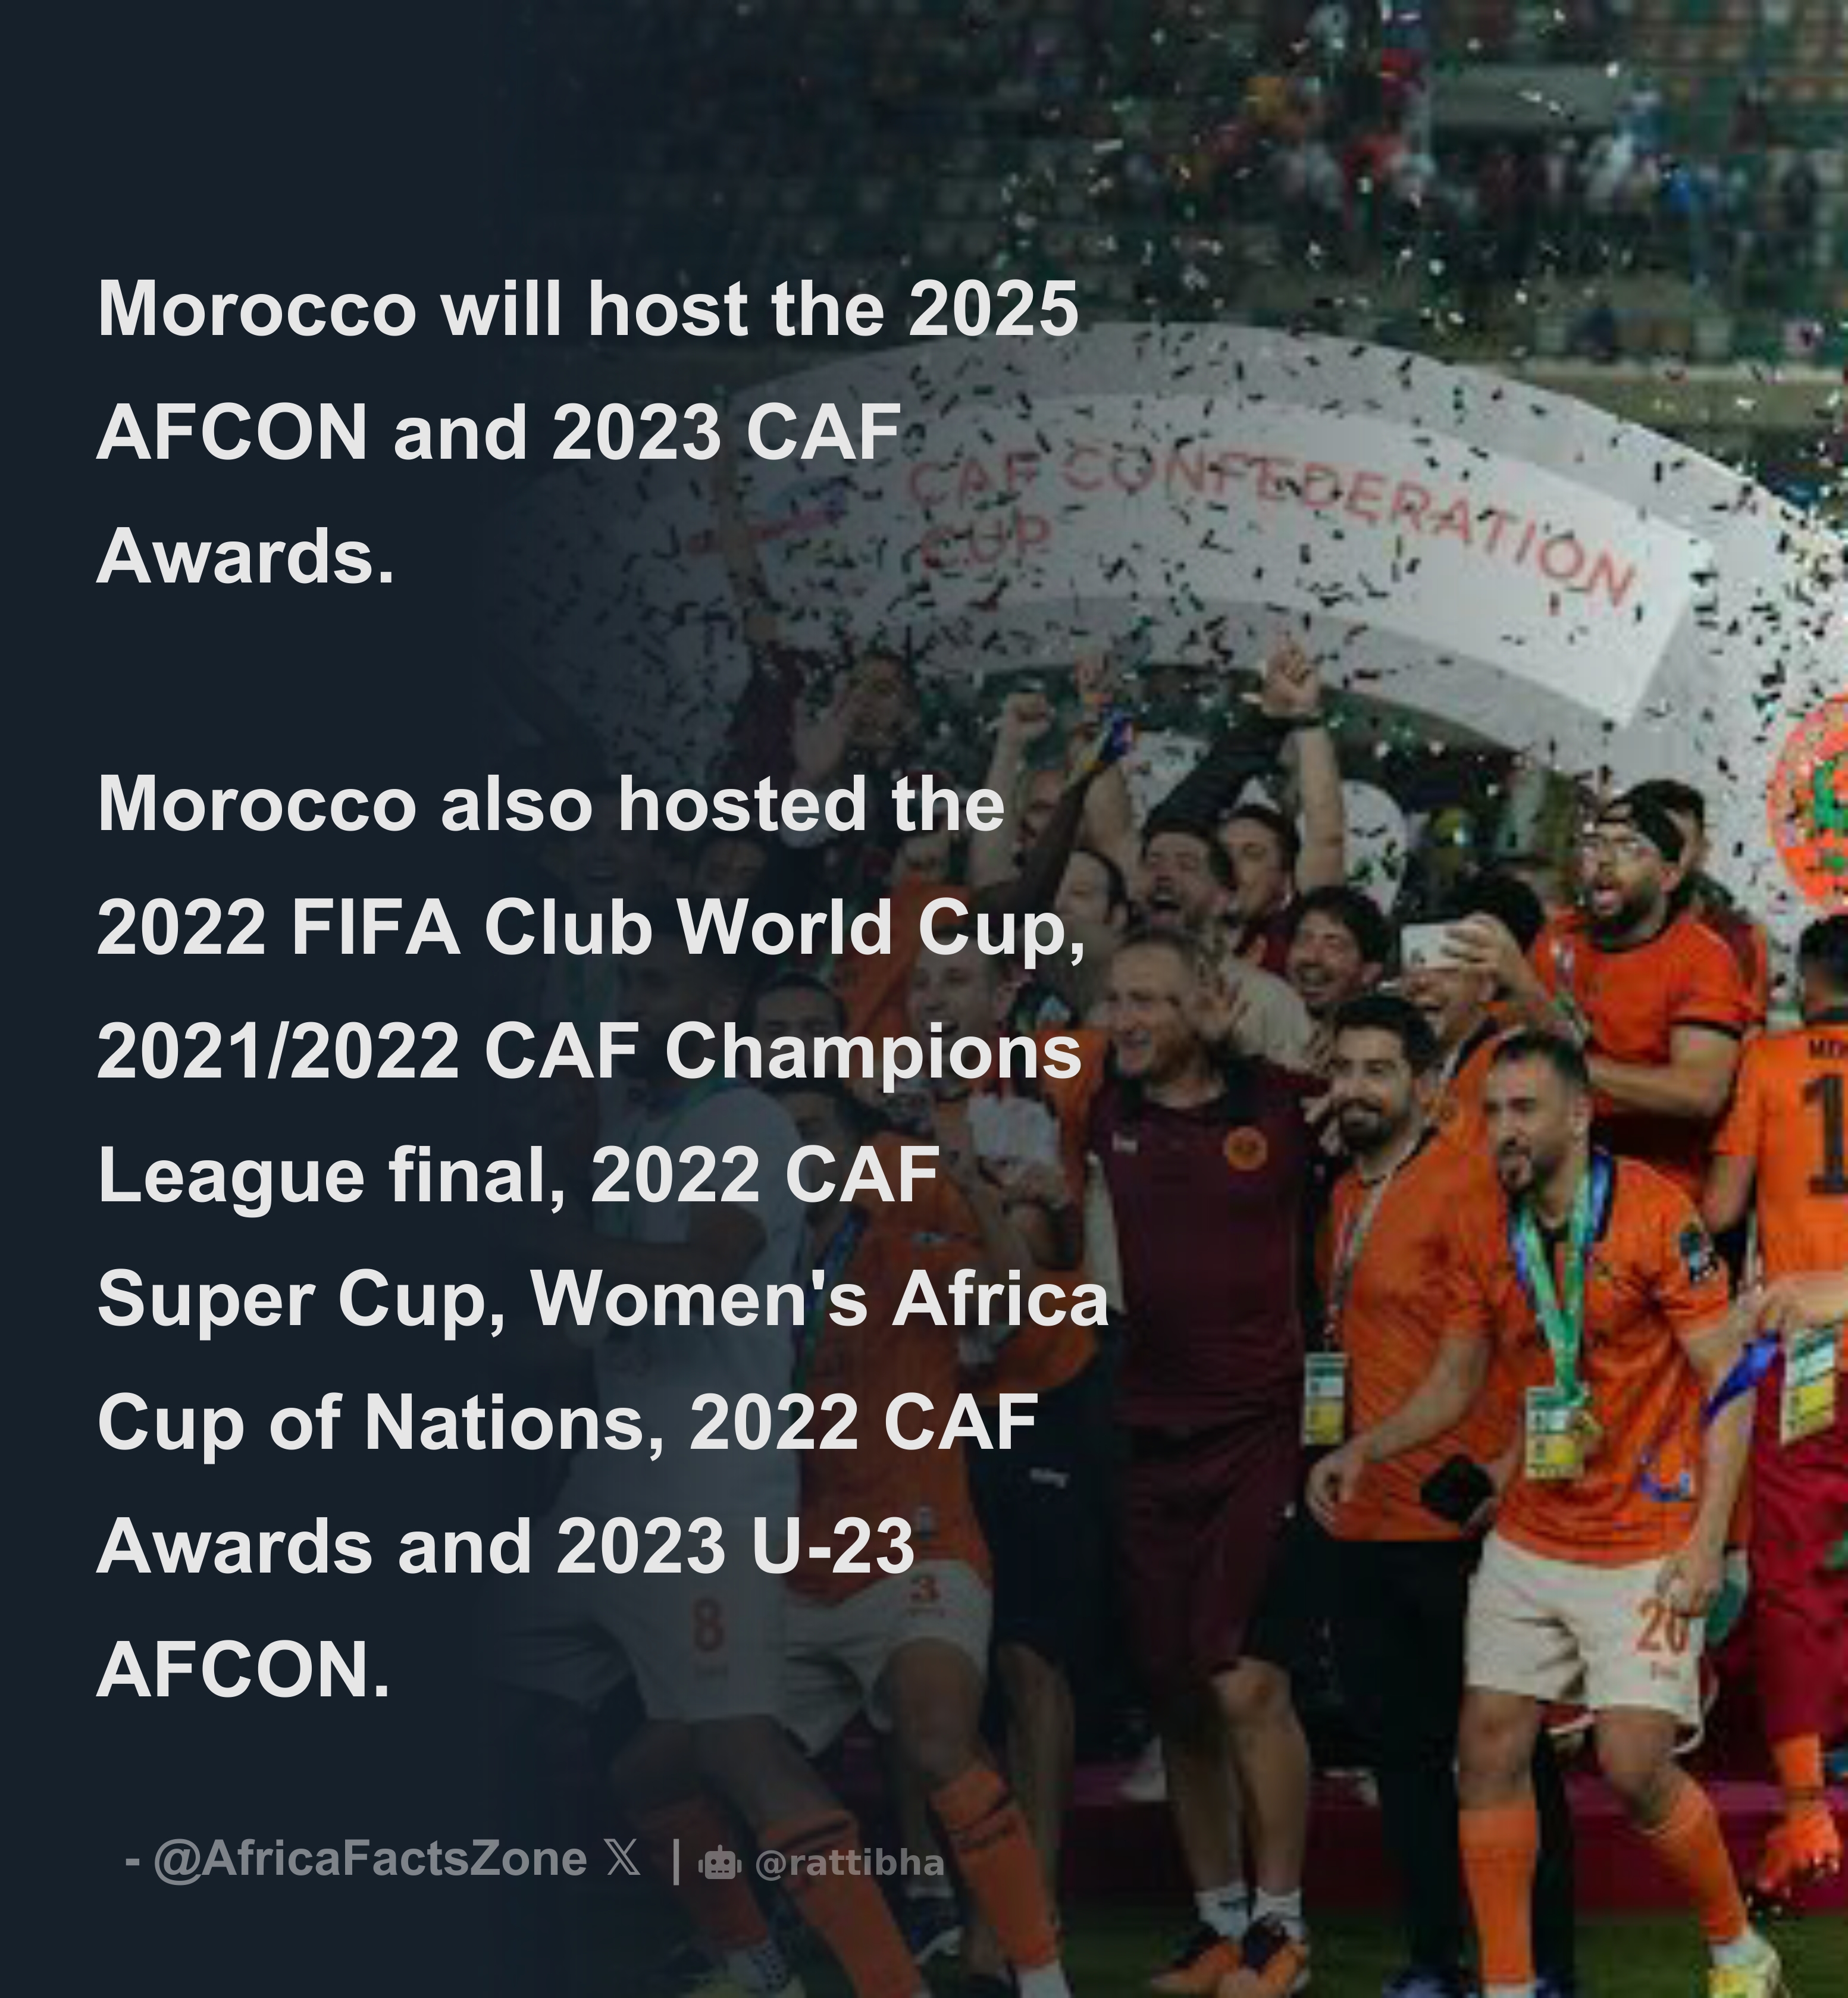 2022 FIFA Club World Cup to be Held in Morocco